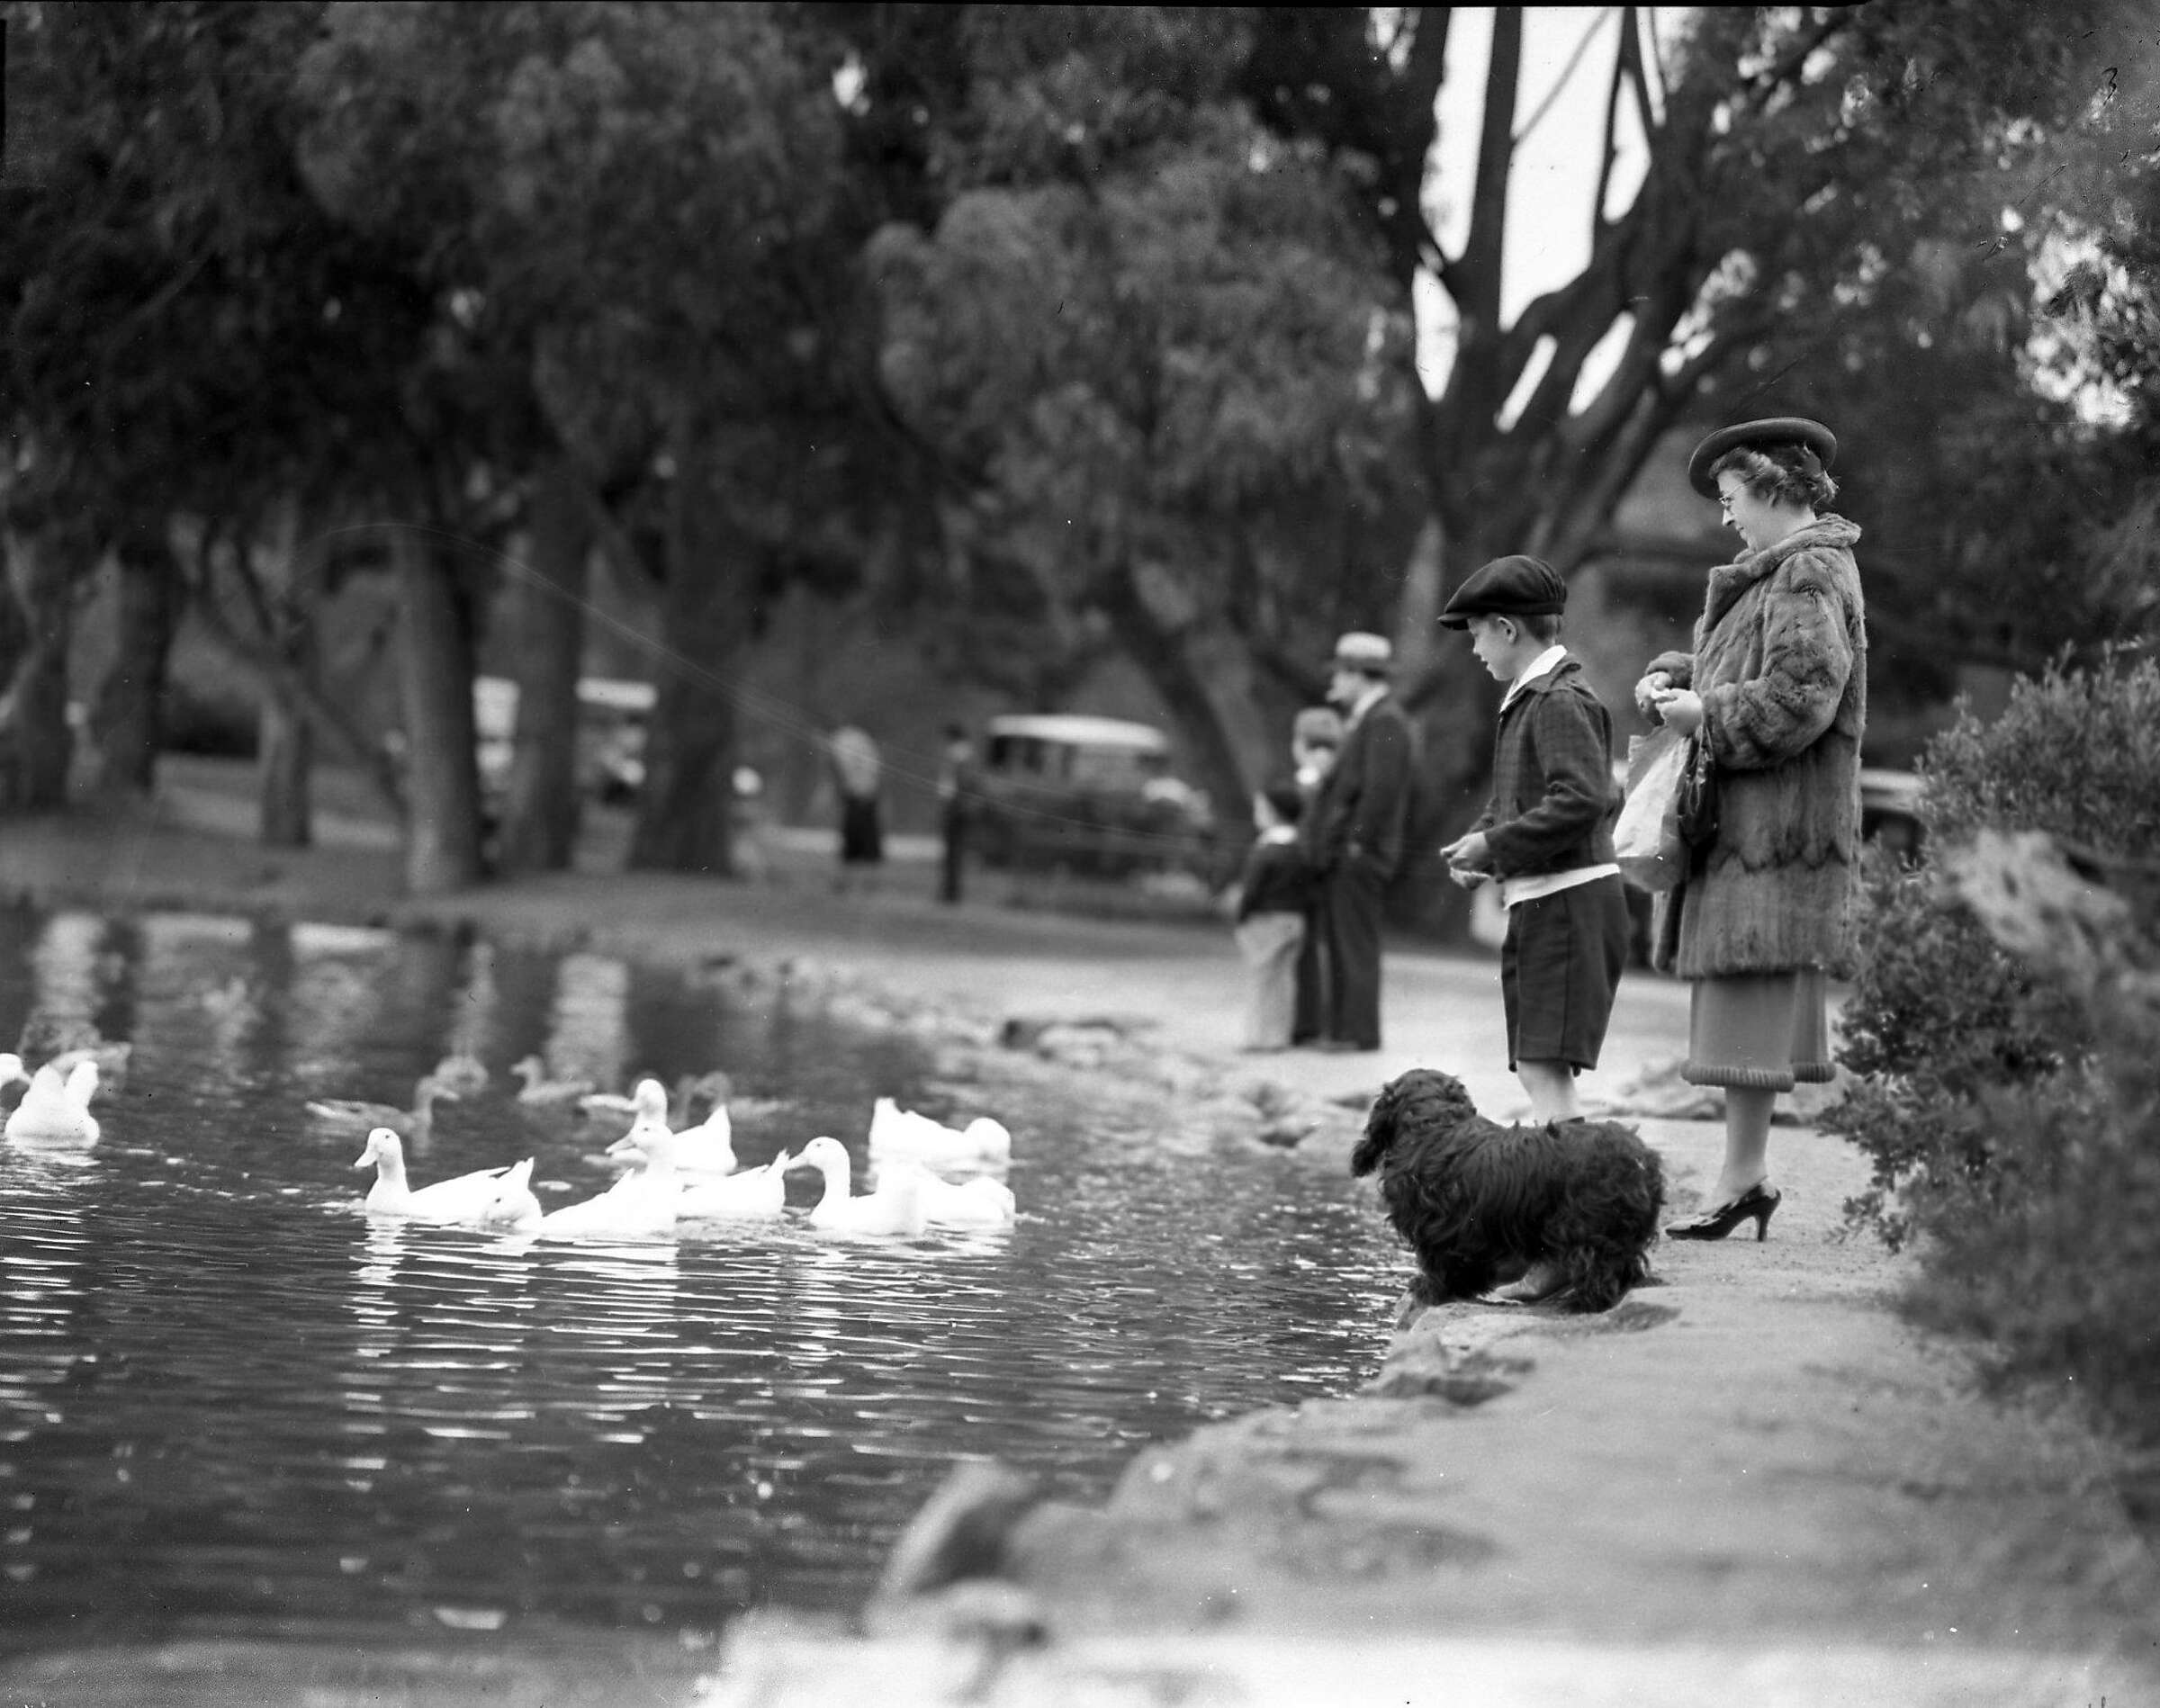 Golden Gate Park At 150 Archive Photos Of San Francisco At Rest And Play In The Park Throughout